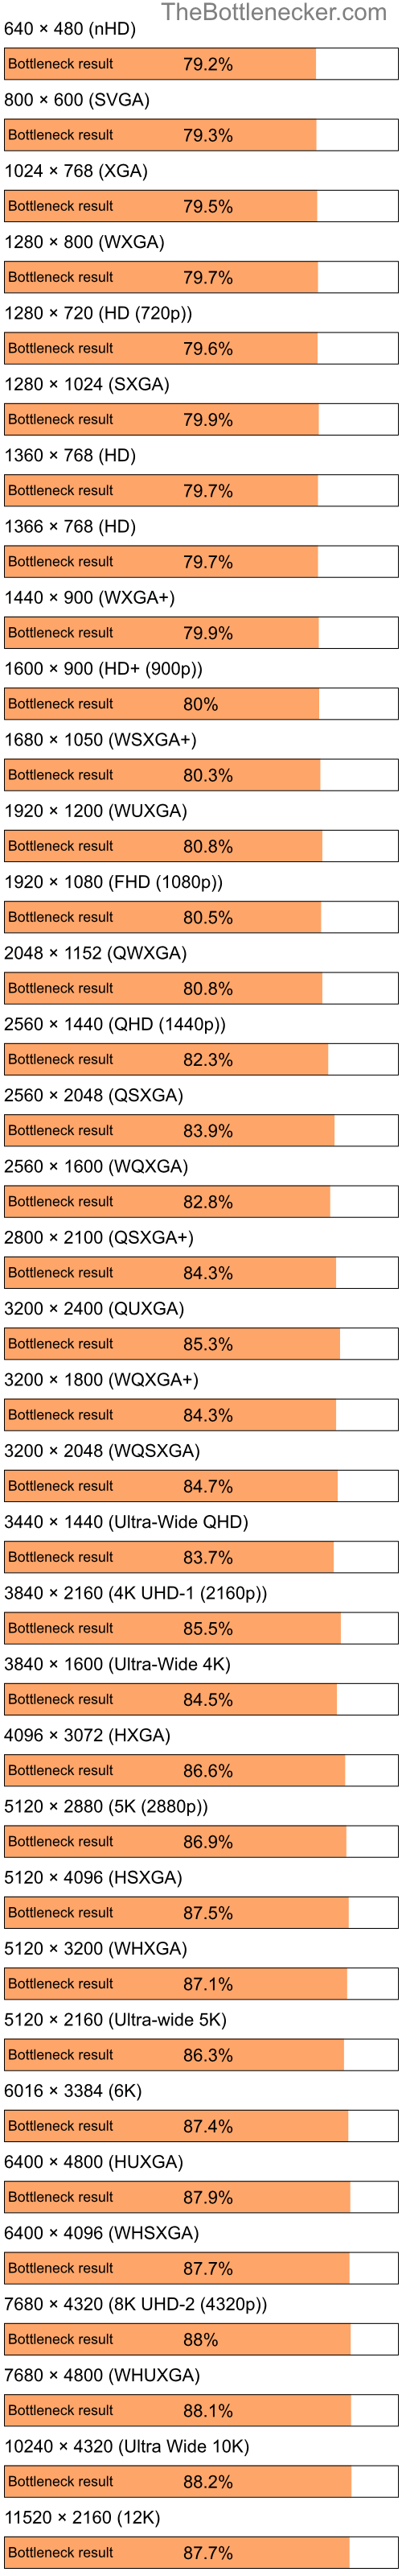 Bottleneck results by resolution for Intel Pentium 4 and AMD Mobility Radeon X300 in Graphic Card Intense Tasks